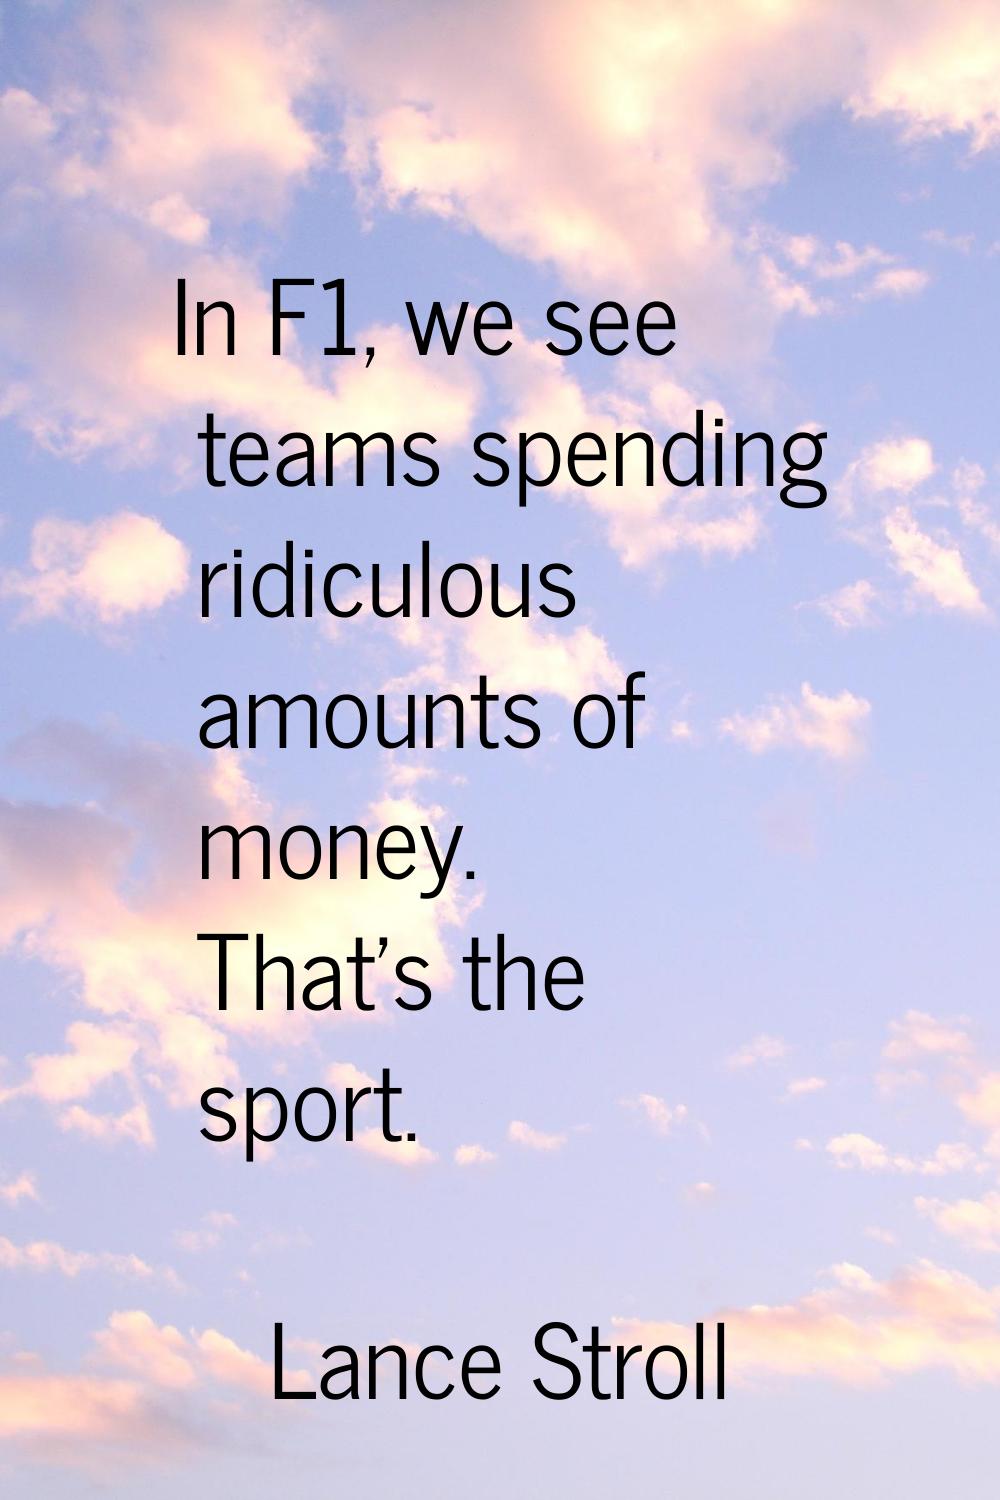 In F1, we see teams spending ridiculous amounts of money. That's the sport.